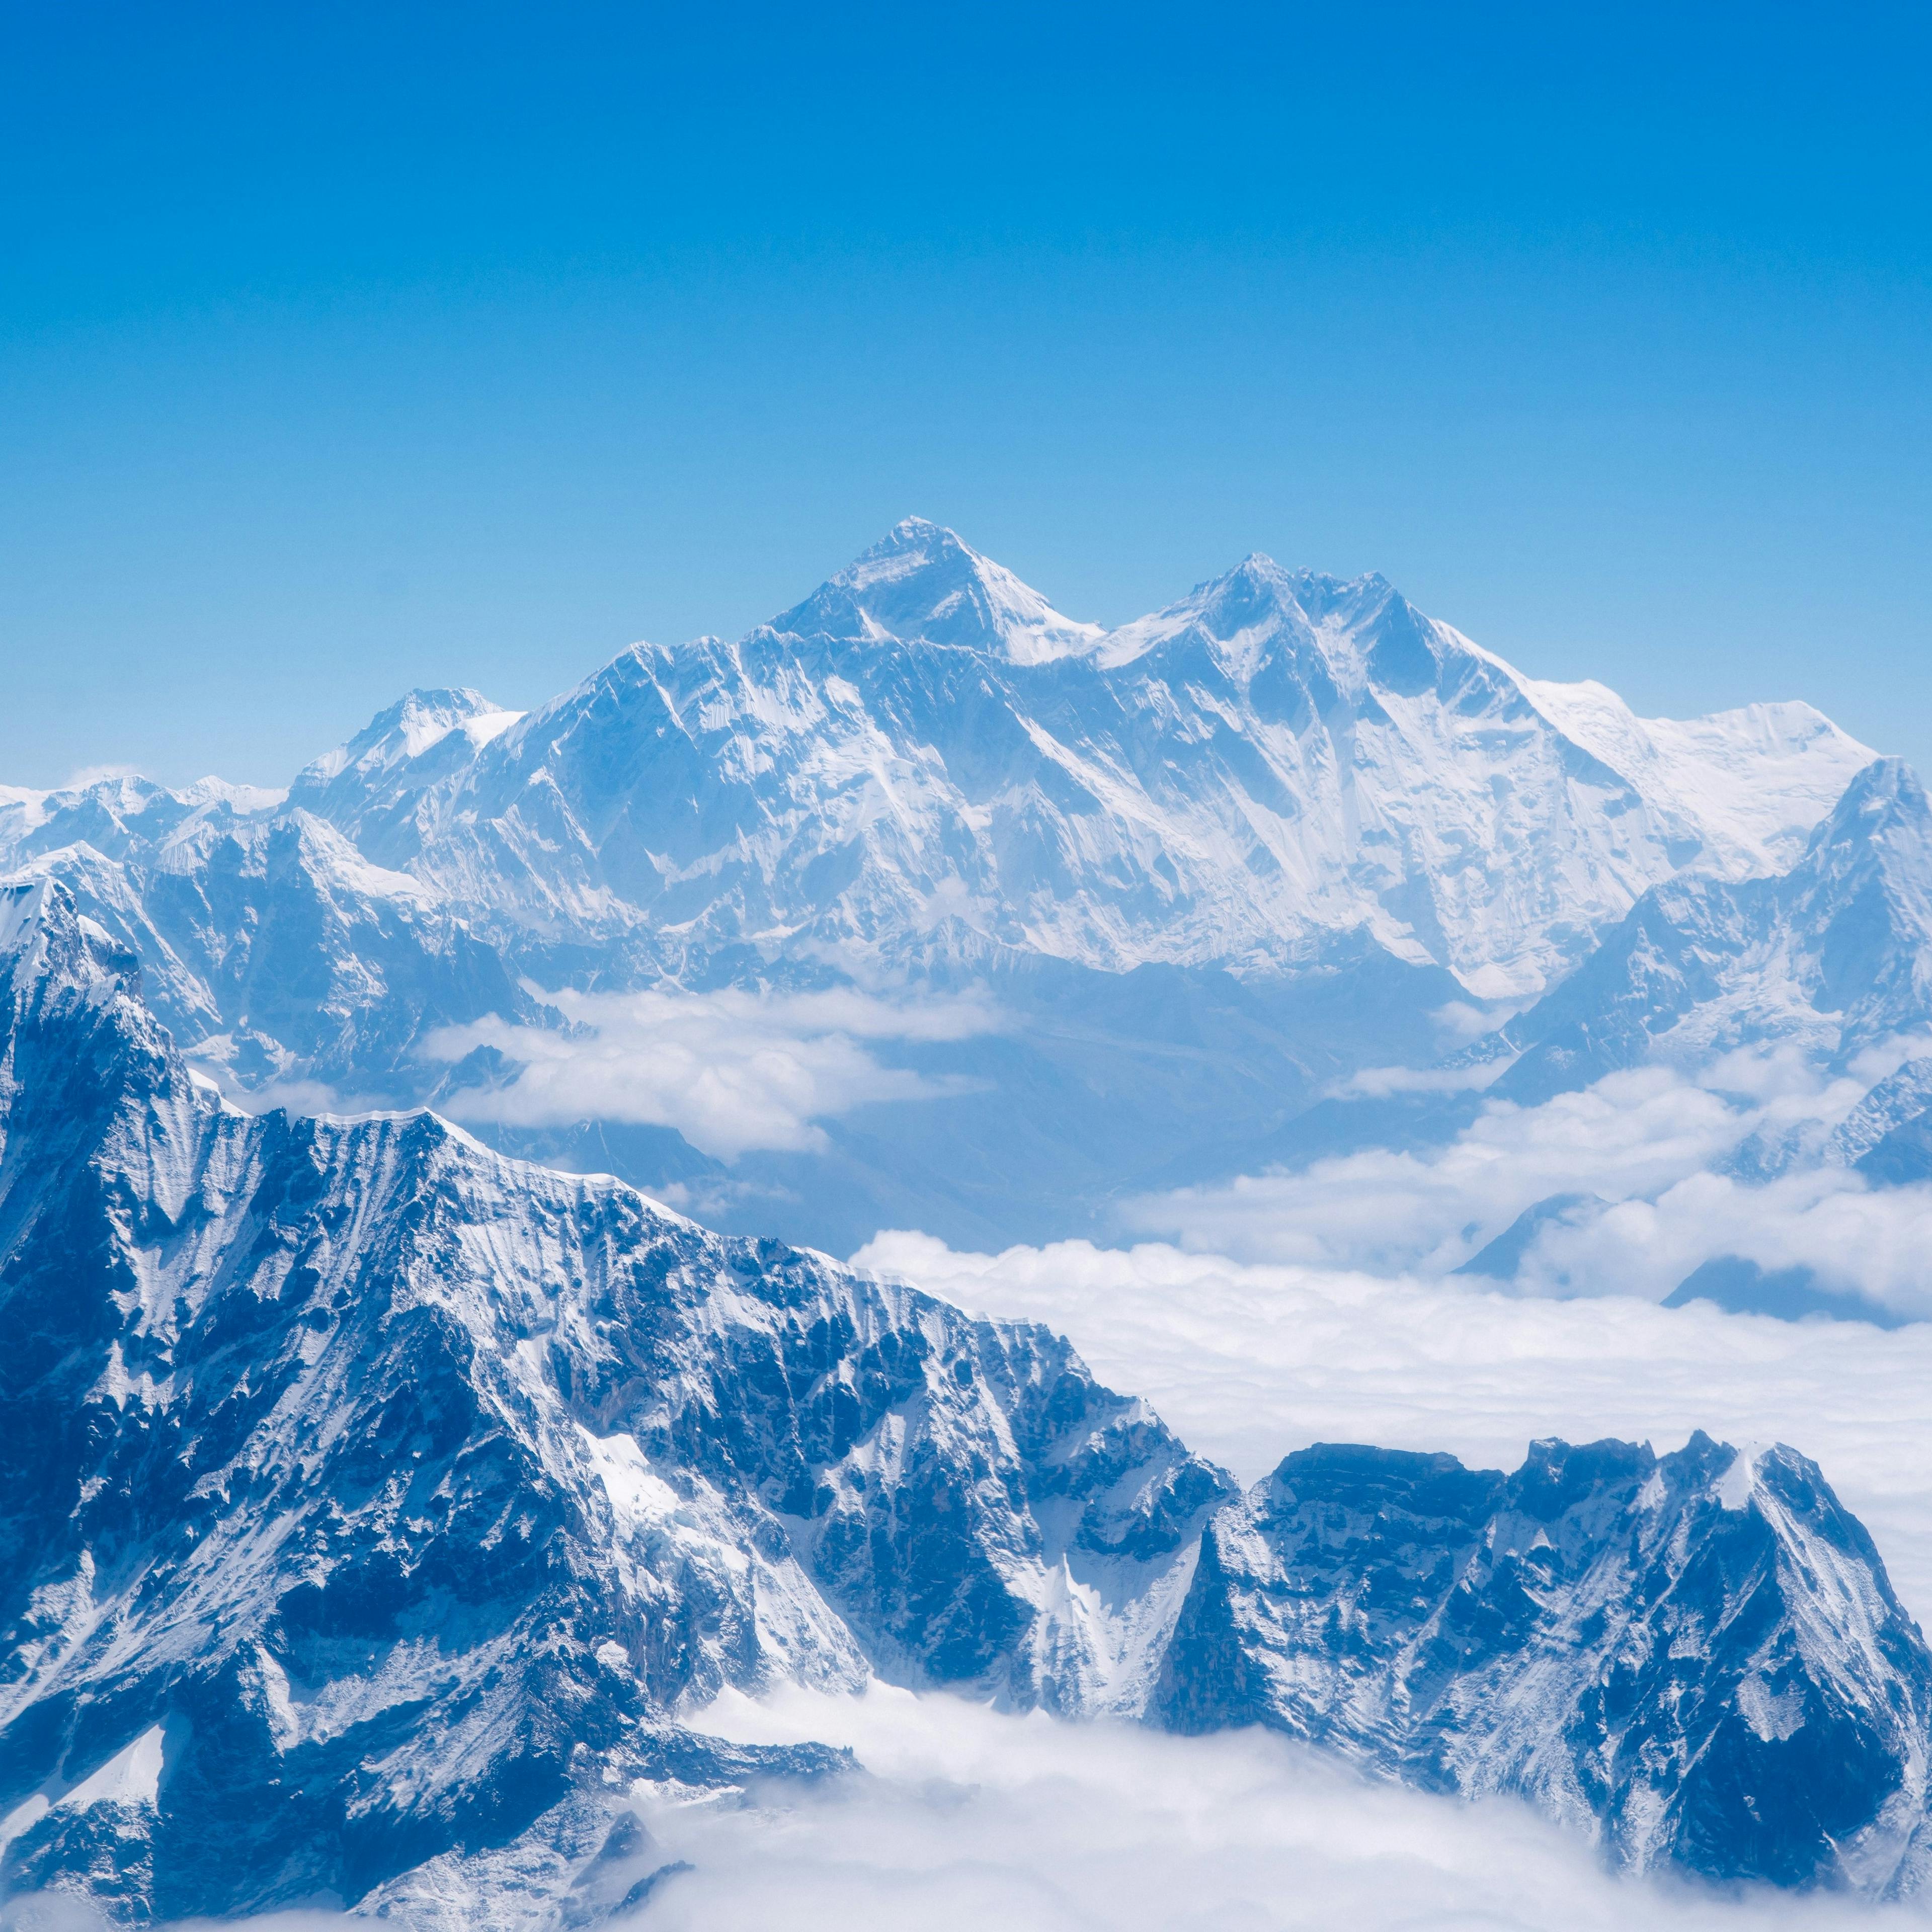 Mount Everest (photo from Andreas Gabler on unsplash)